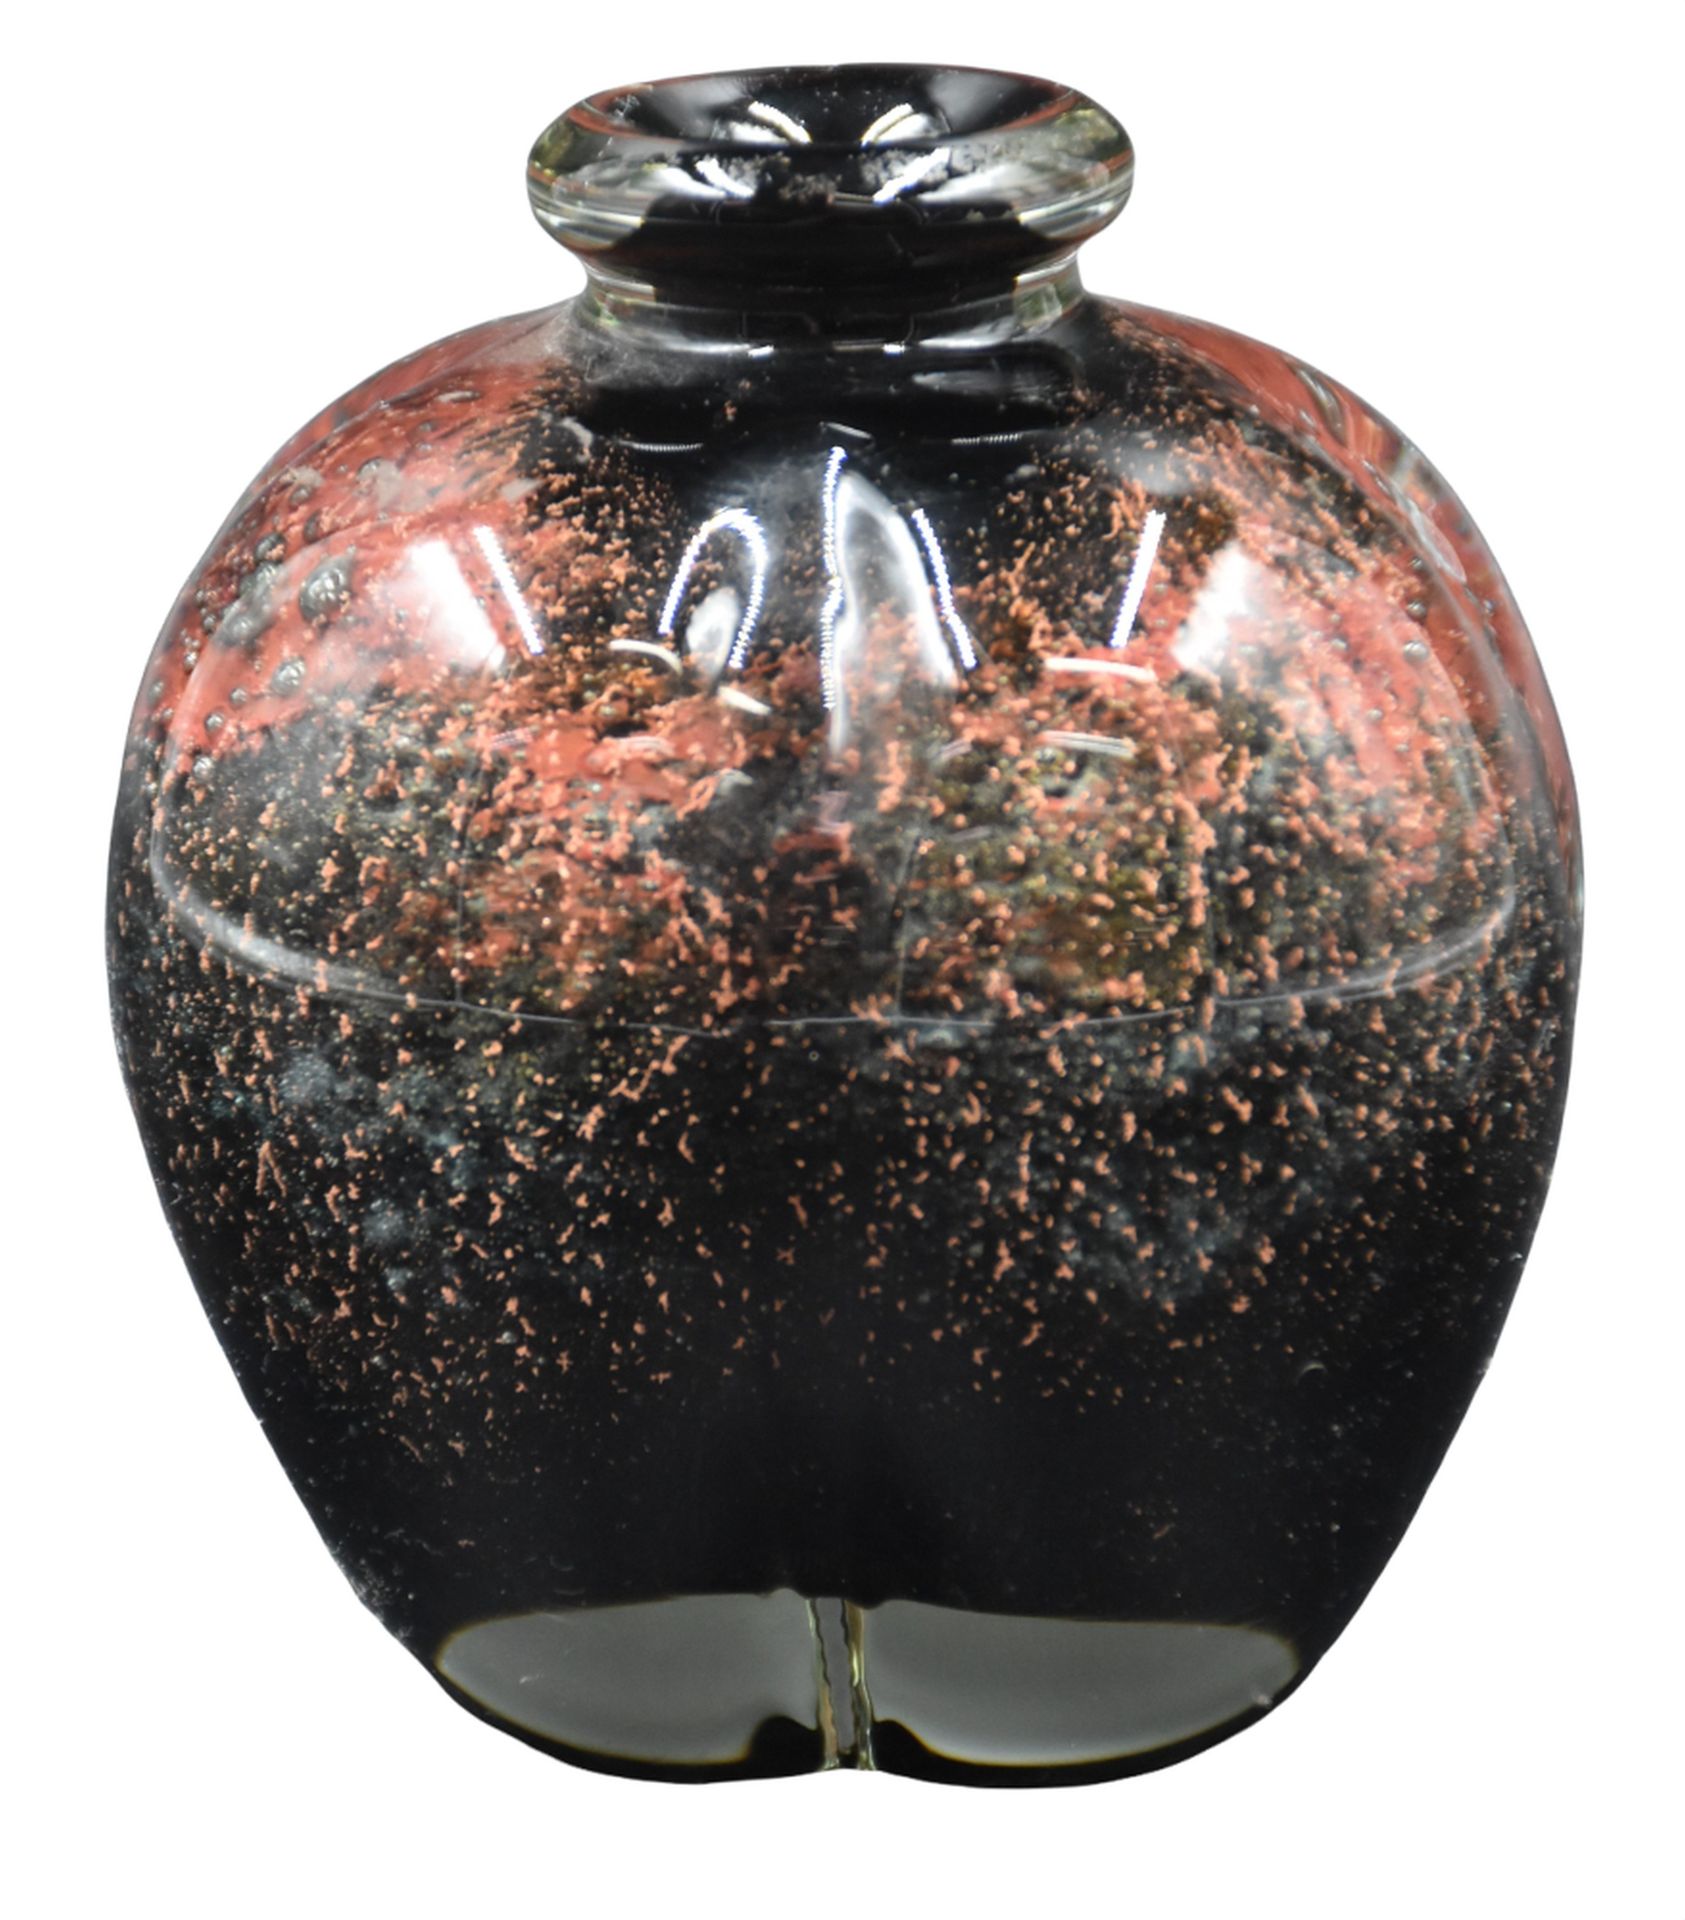 Null Claire MONOD. Vase in glass design with glitter inclusions. Work around 197&hellip;